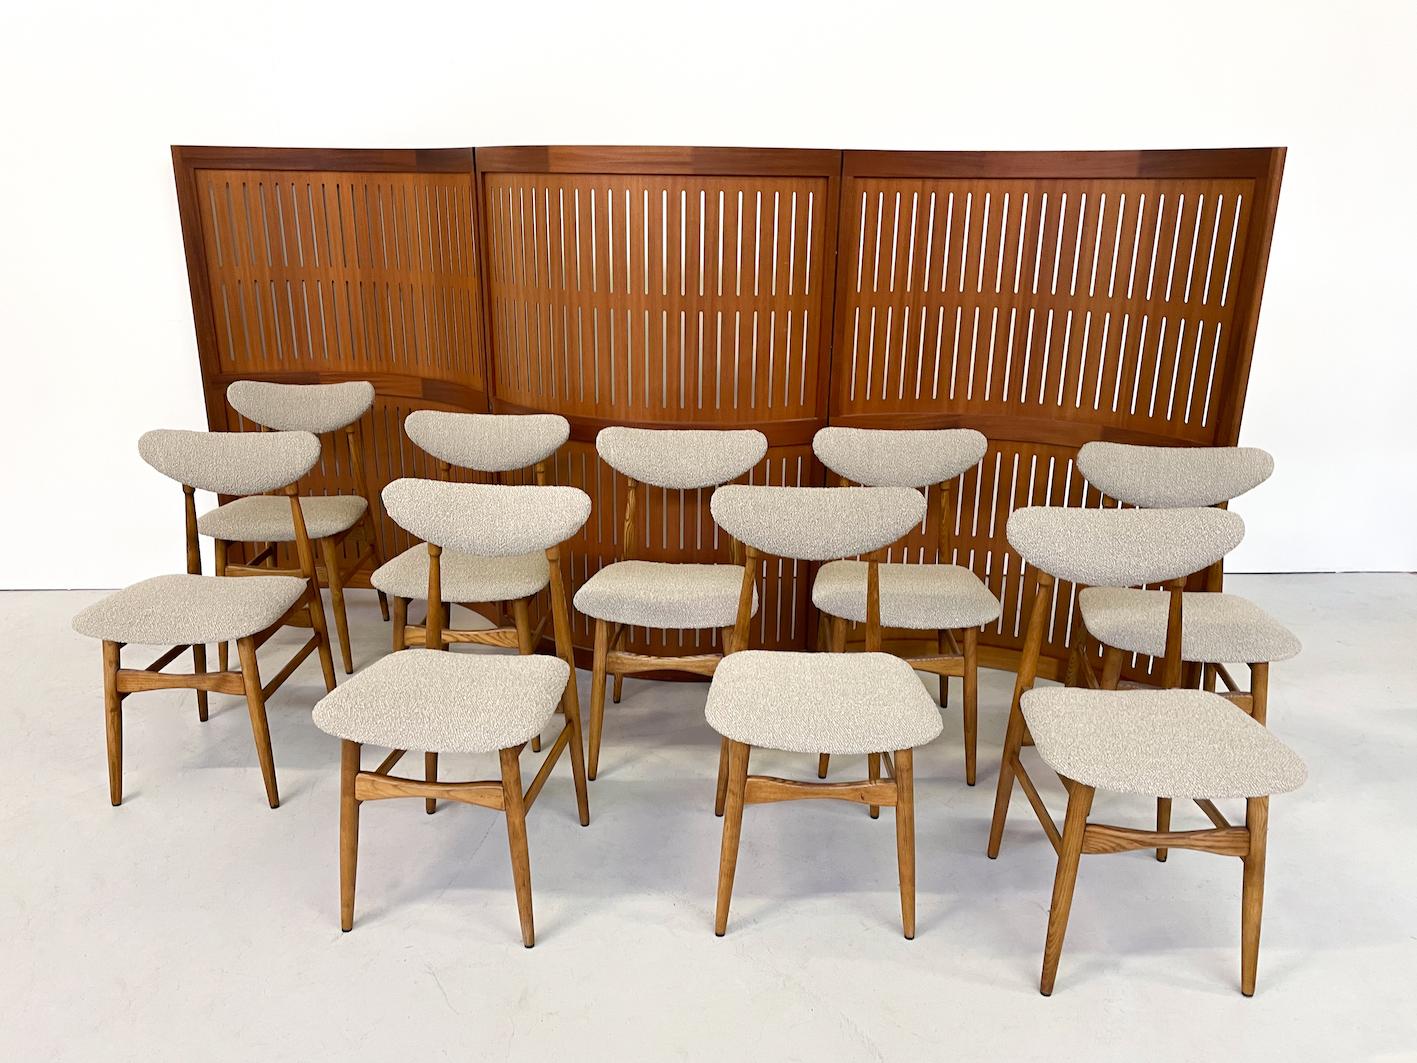 Mid-Century Modern Set of 12 Chairs, Italy, 1960s - New Upholstery In Good Condition For Sale In Brussels, BE